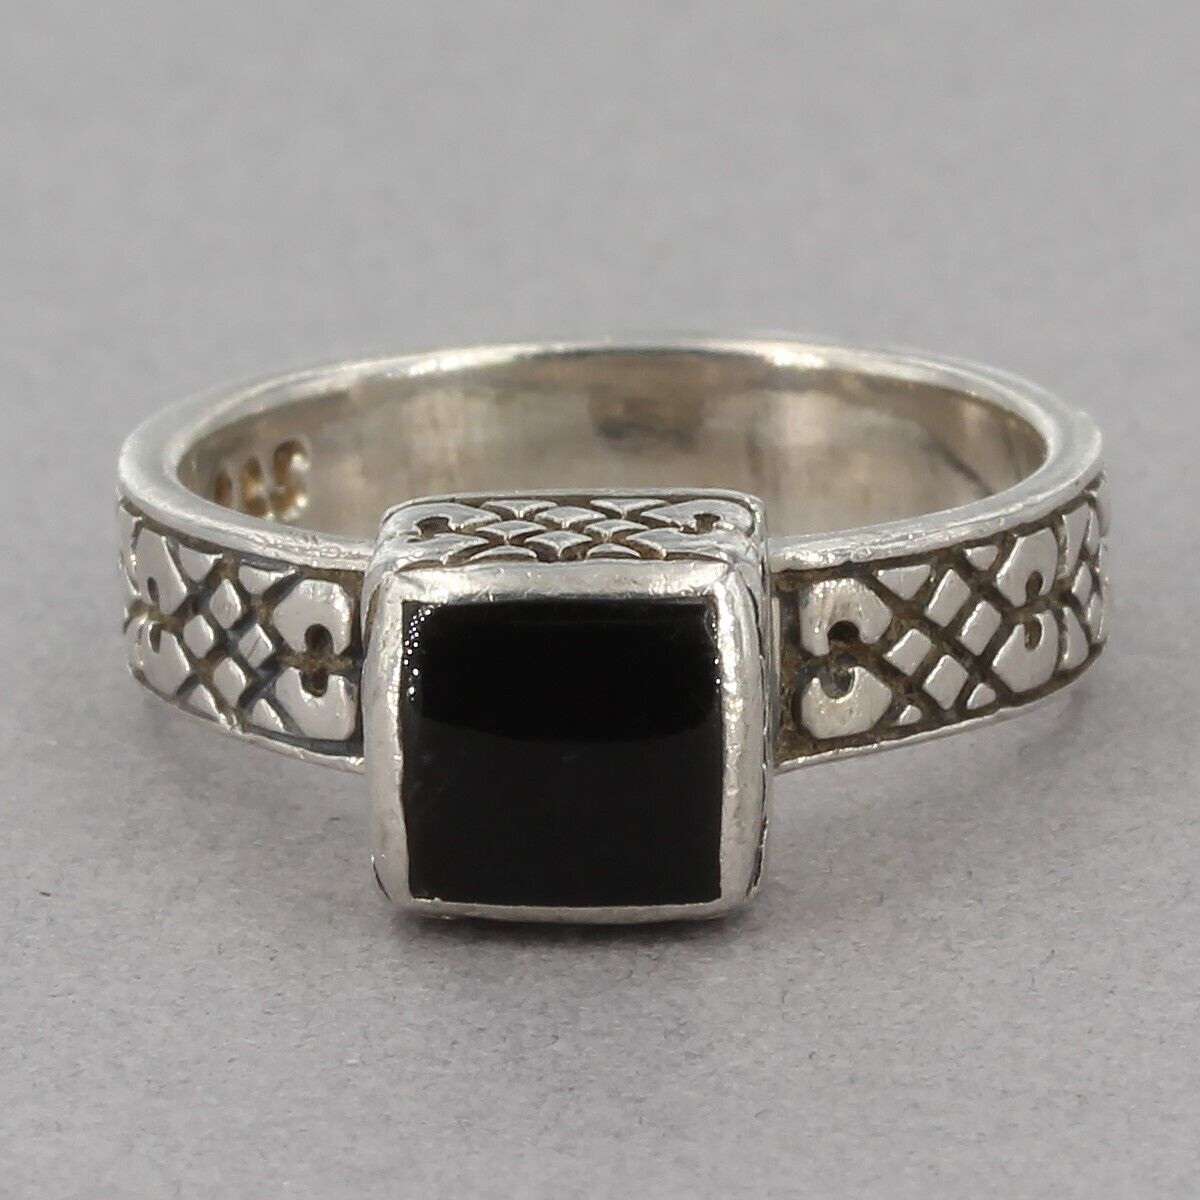 HTF Retired Silpada Small Sterling Silver Square Black Onyx Ring R1331 Size 5.75